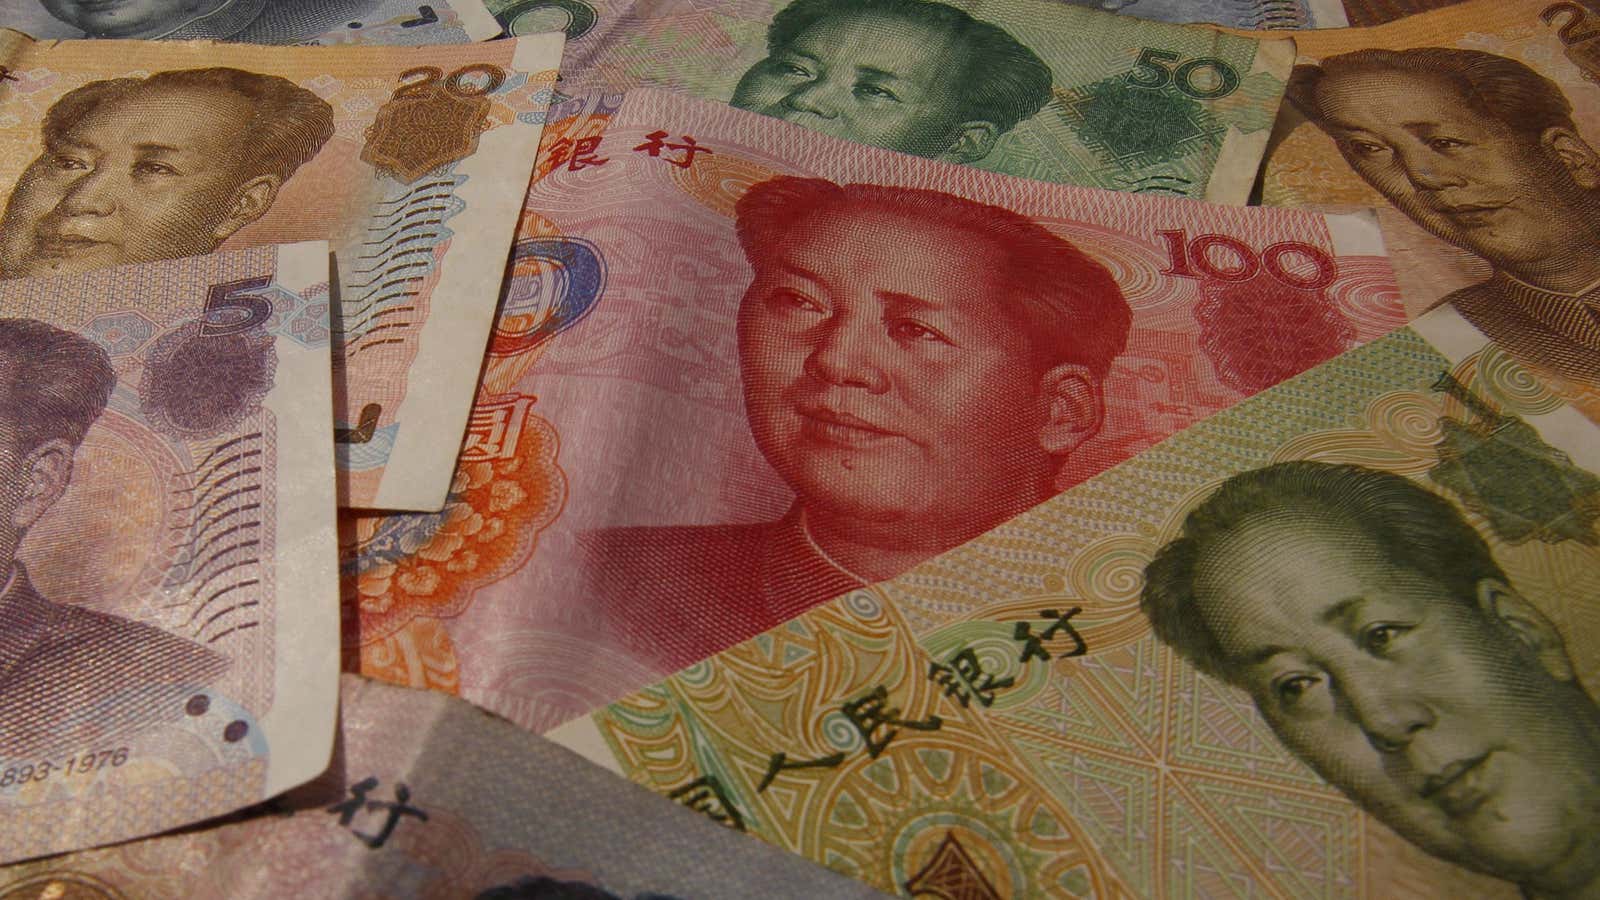 China’s yuan is no longer undervalued, says IMF